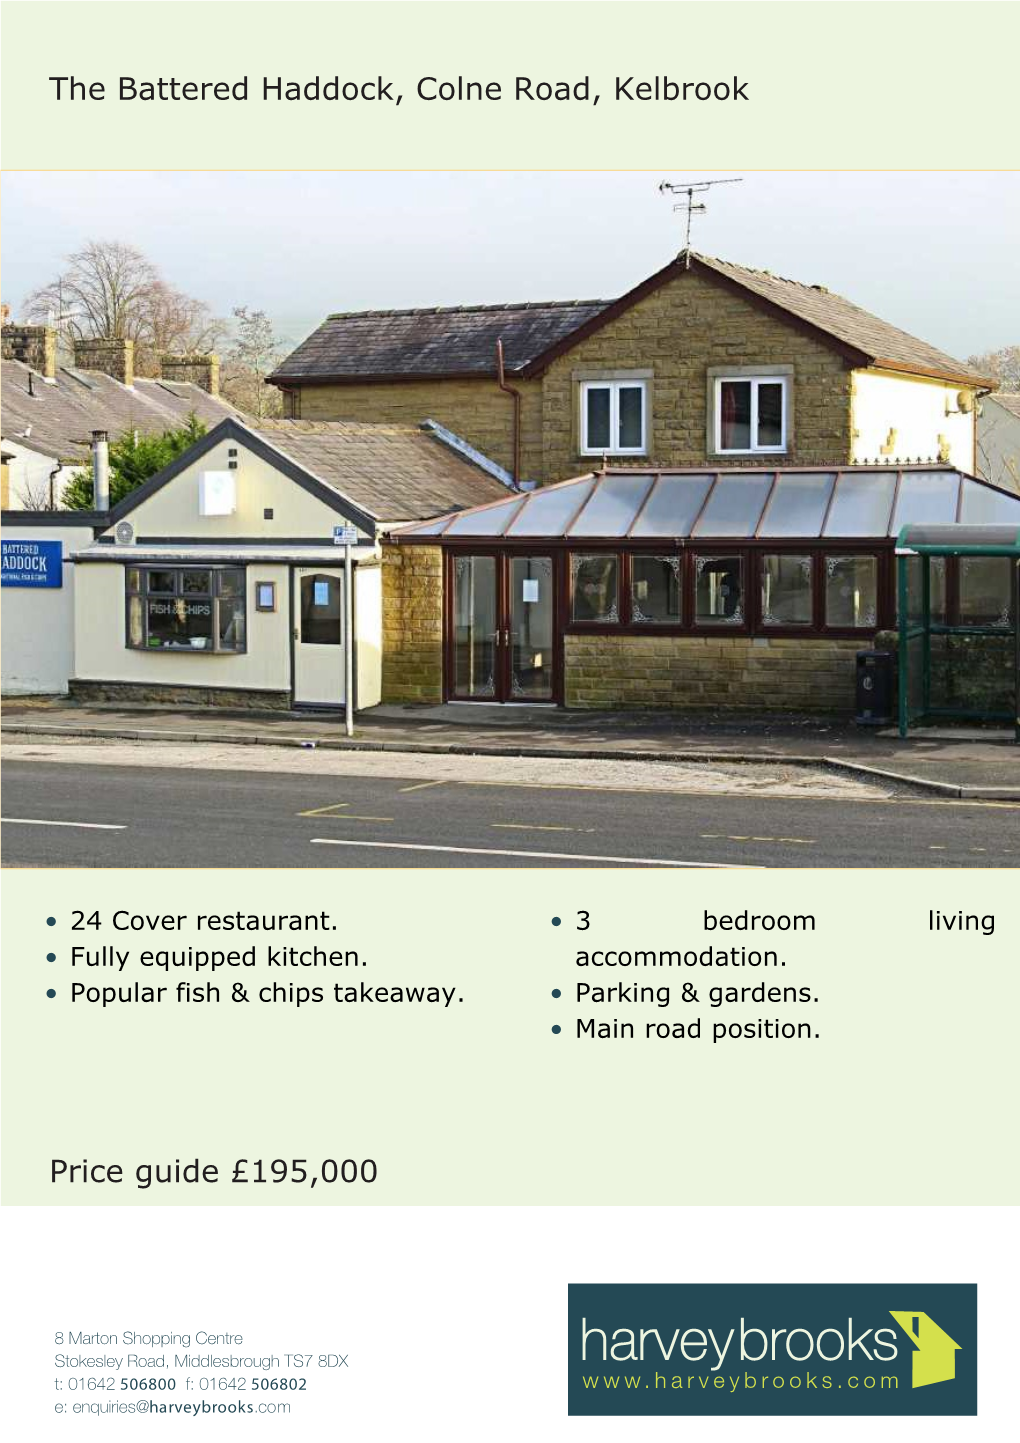 The Battered Haddock, Colne Road, Kelbrook Price Guide £195,000